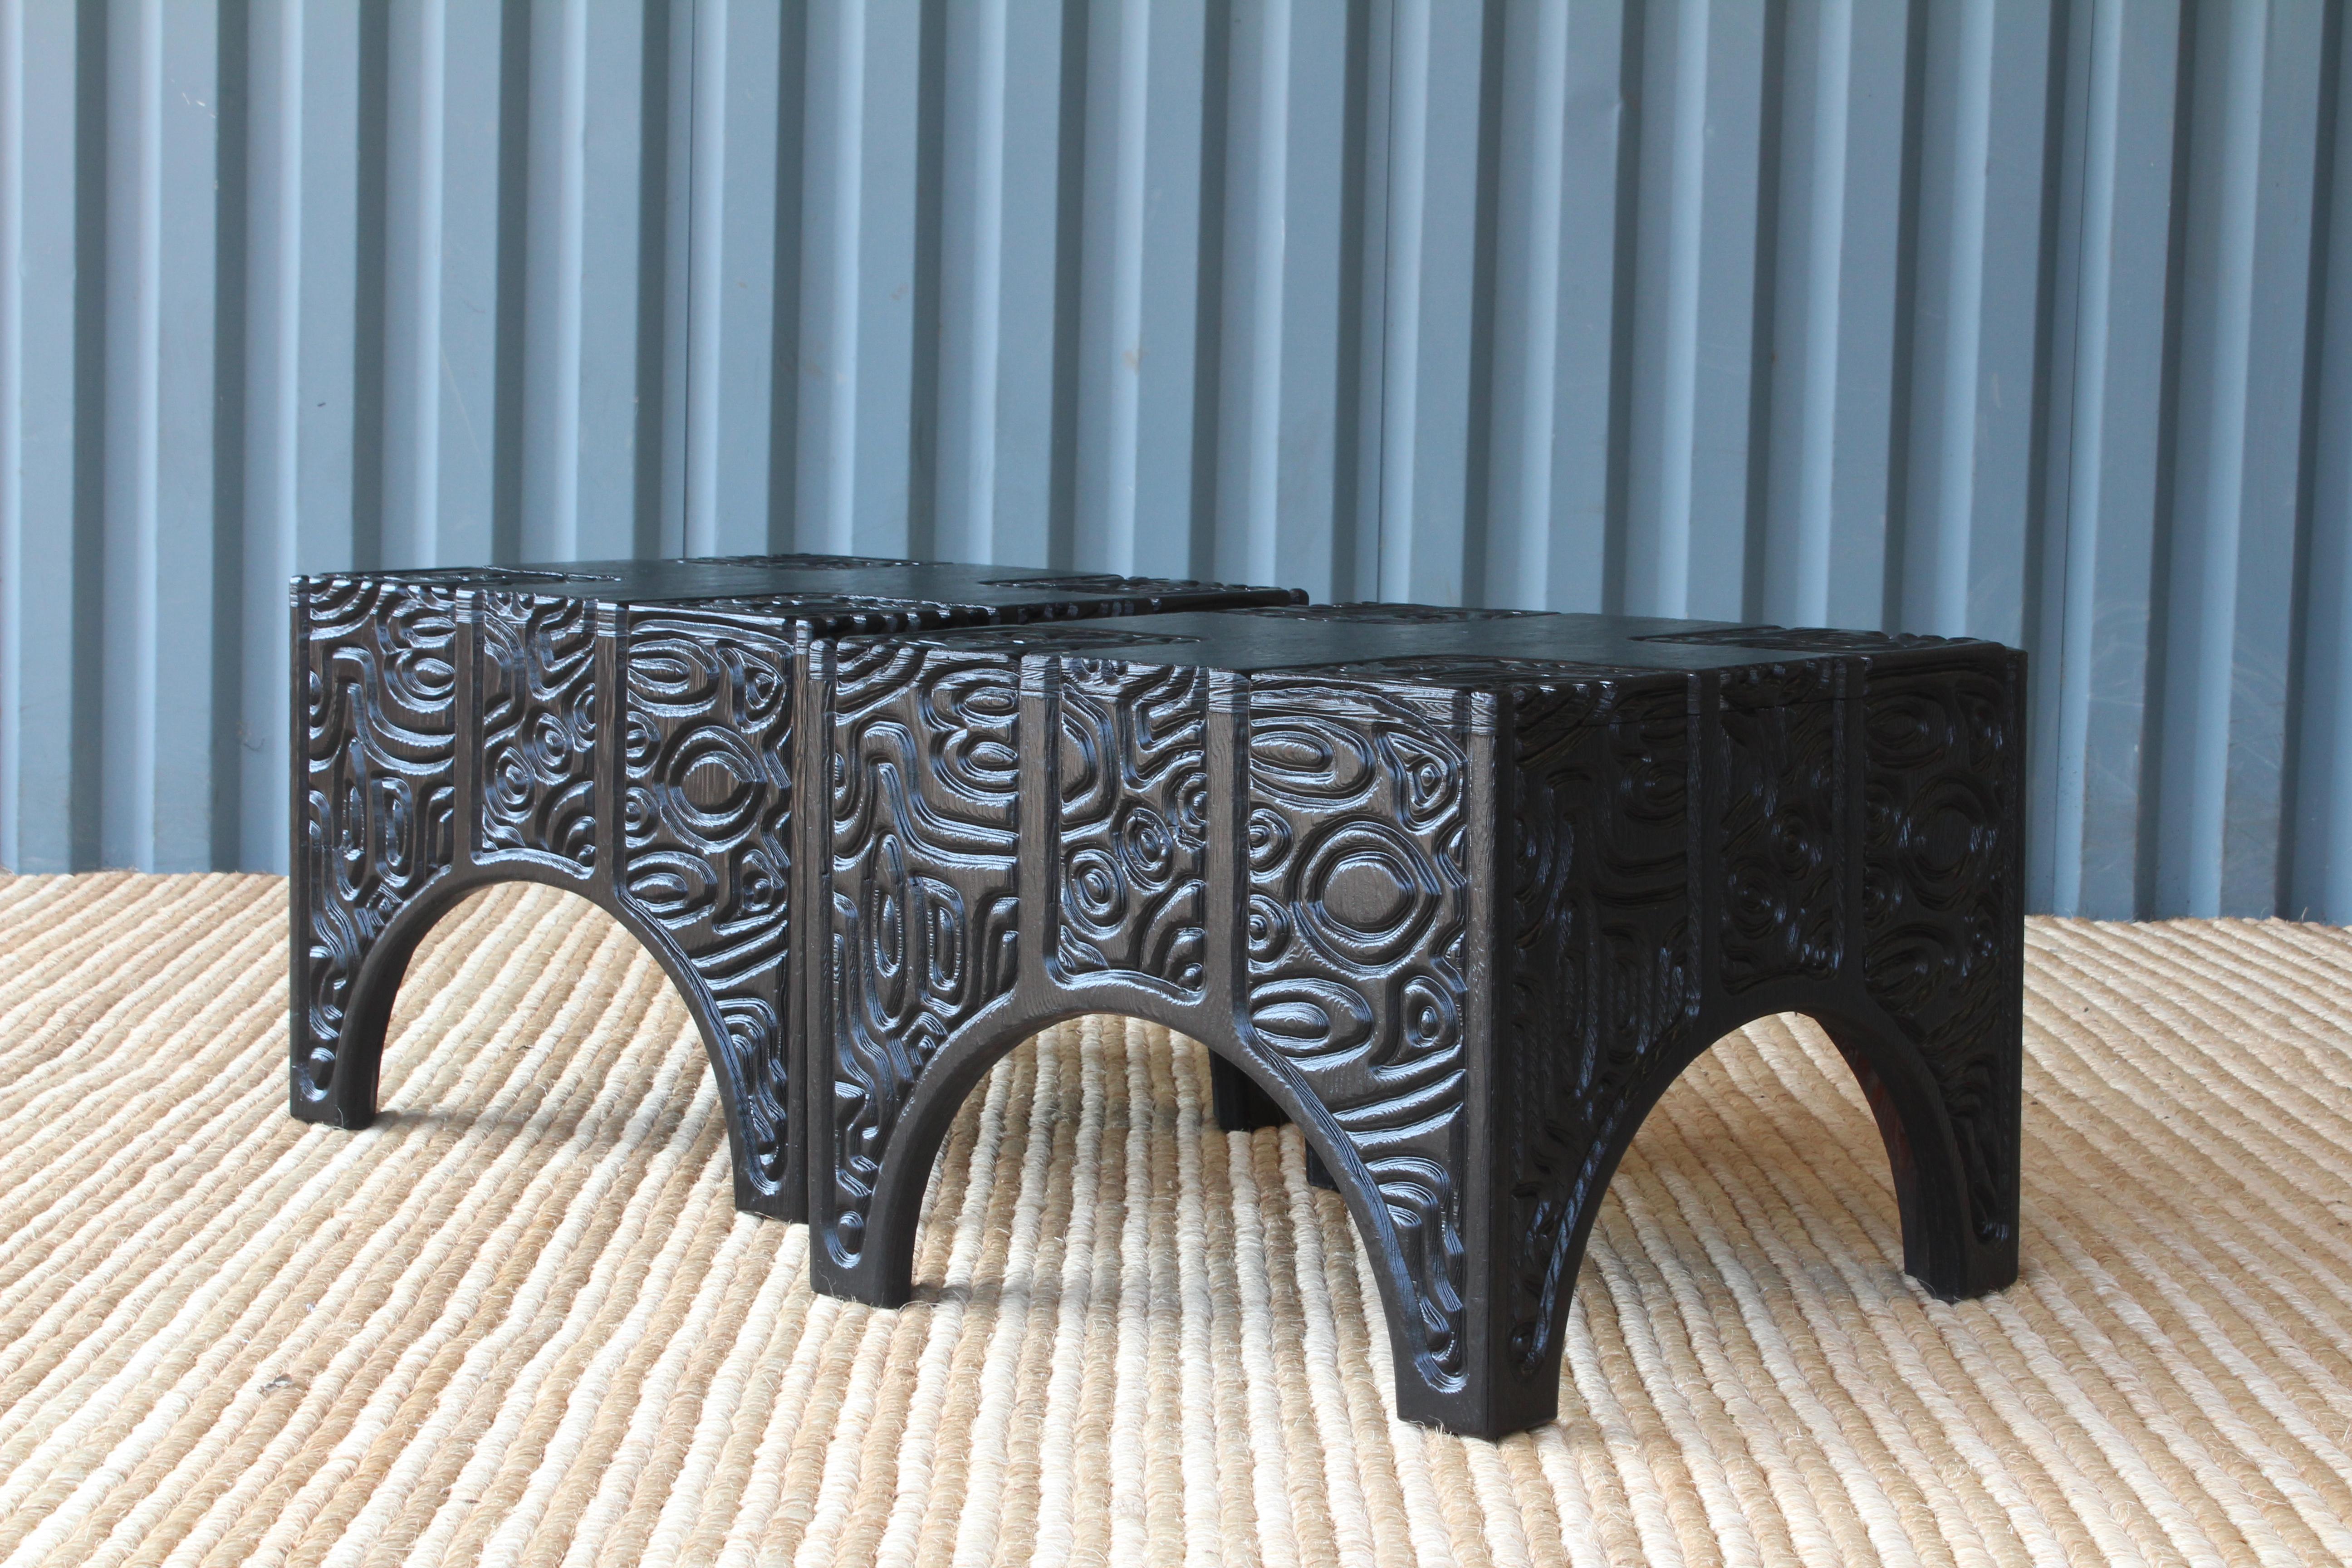 Pair of rare and unusual panel carved end tables by Sherrill Broudy, in the style of Witco. The pair have been professionally refinished in satin black. Sold as a pair.